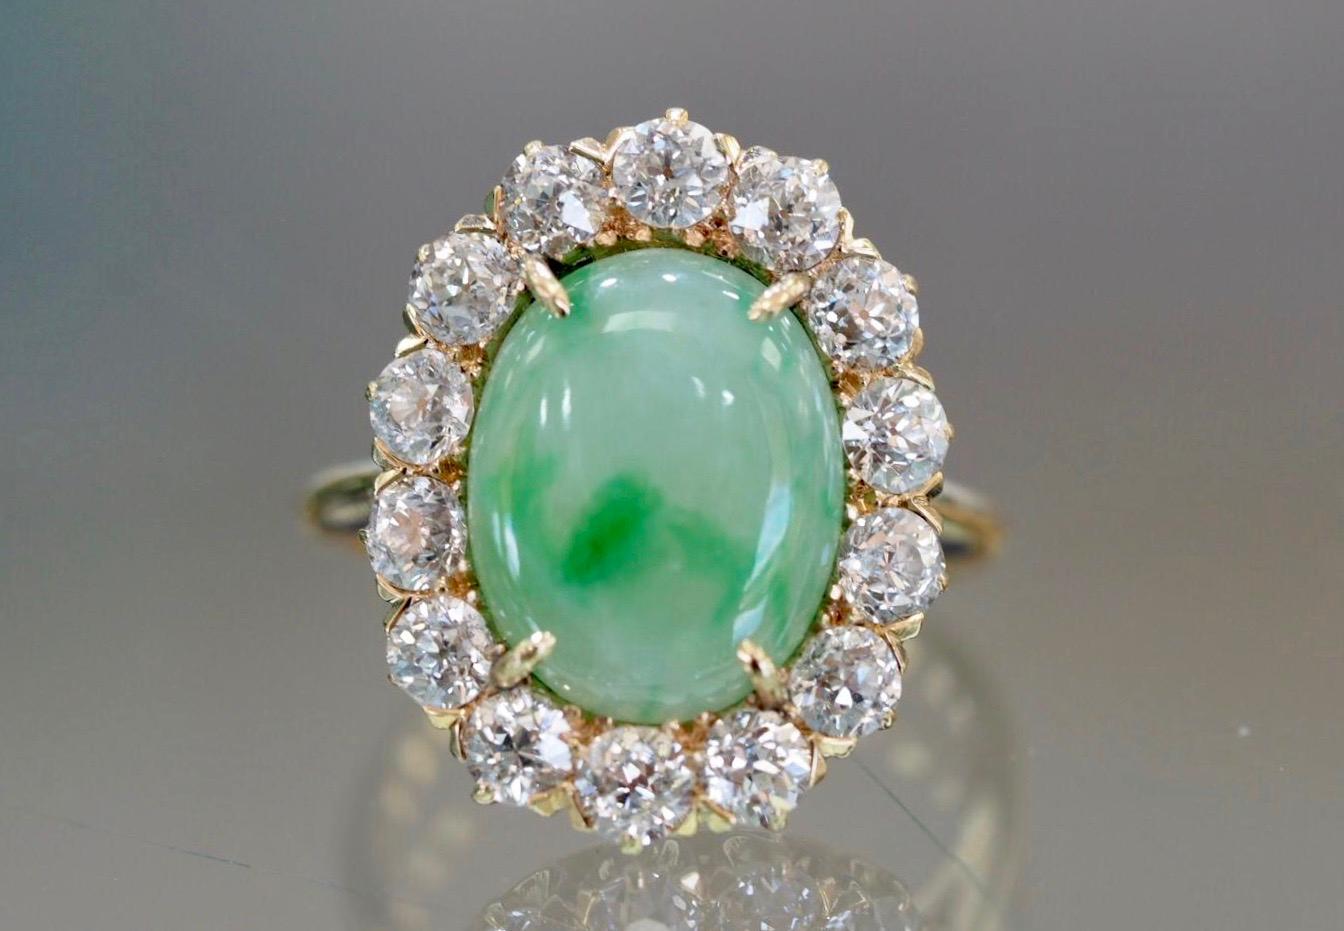 14 Karat Yellow Gold antique Jade Diamond Ring dates back to the late 1890's- early 1910's  includes a natural cabochon shaped Jadeite center with beautiful  sporadic shades of Green. The Jadeite measures 13.00 x 10.23 x 2.75mm with an approximate